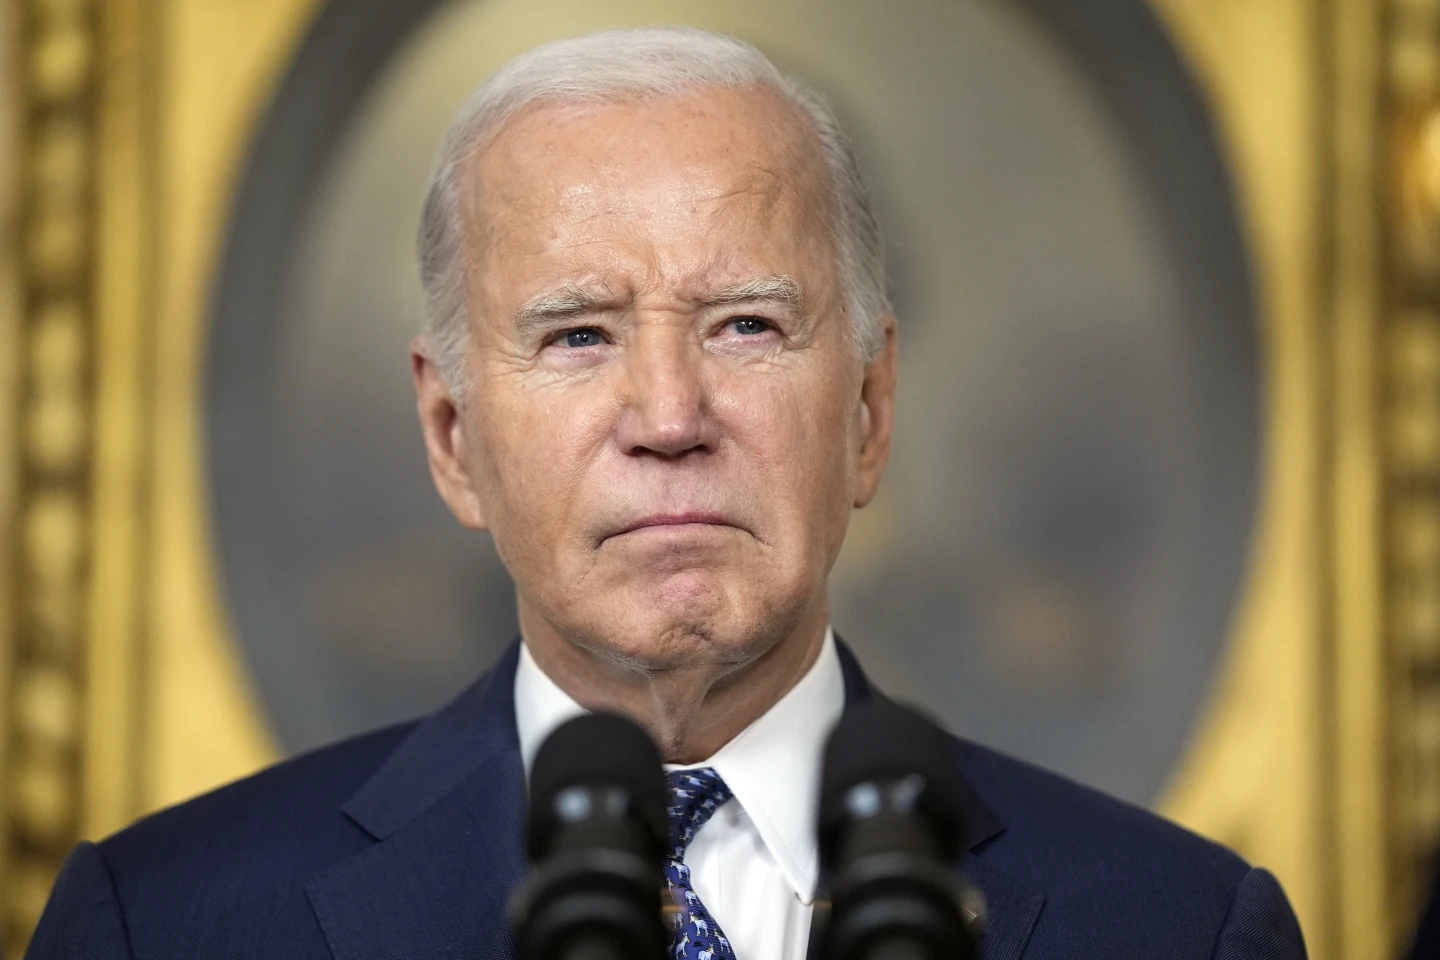 Classified papers probe clears President Biden of wrongdoing, but turns his memory and age into election issues